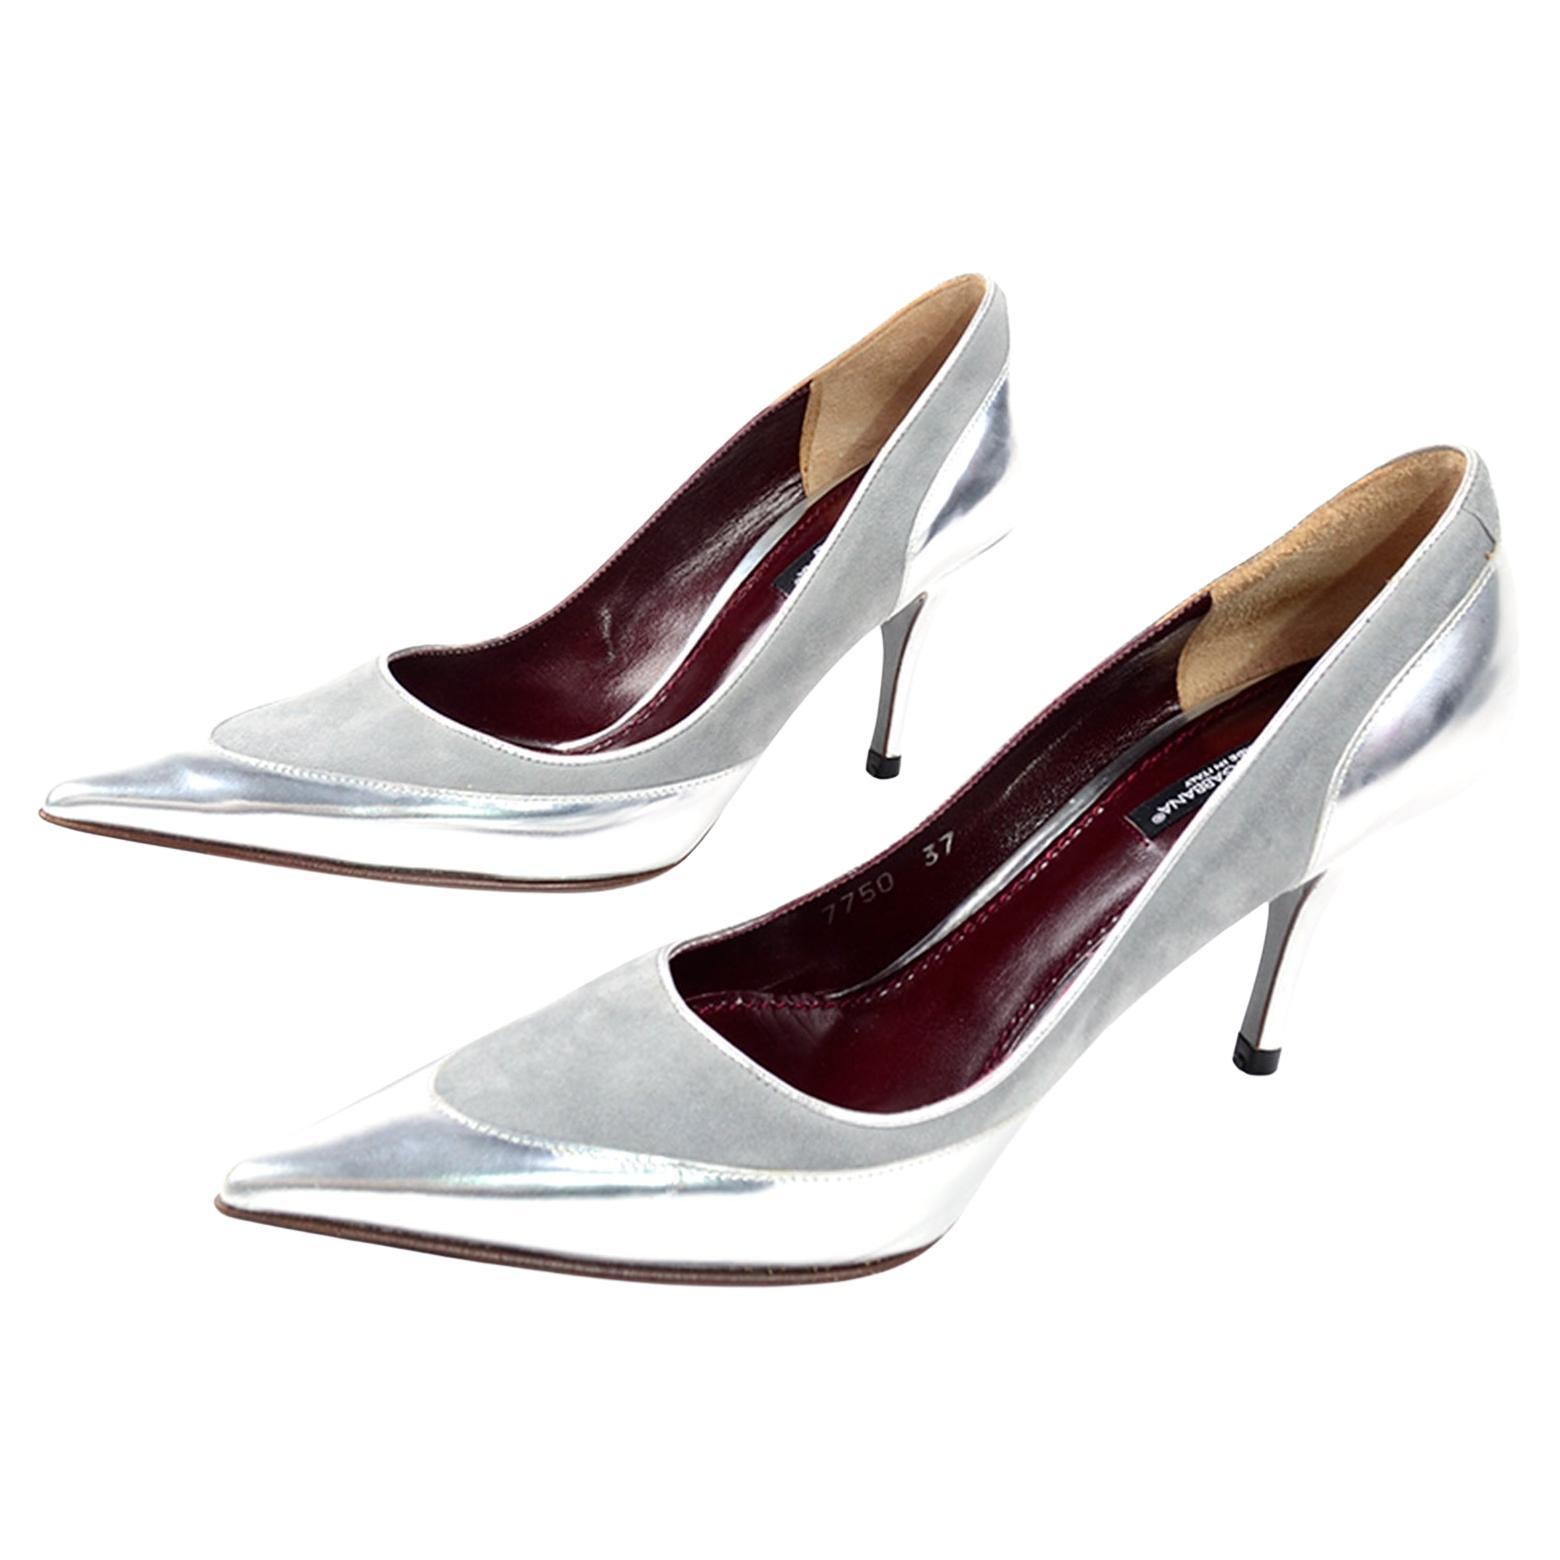 Dolce & Gabbana Shoes in Silver Leather & Suede & Pointed Toes w Heels For Sale